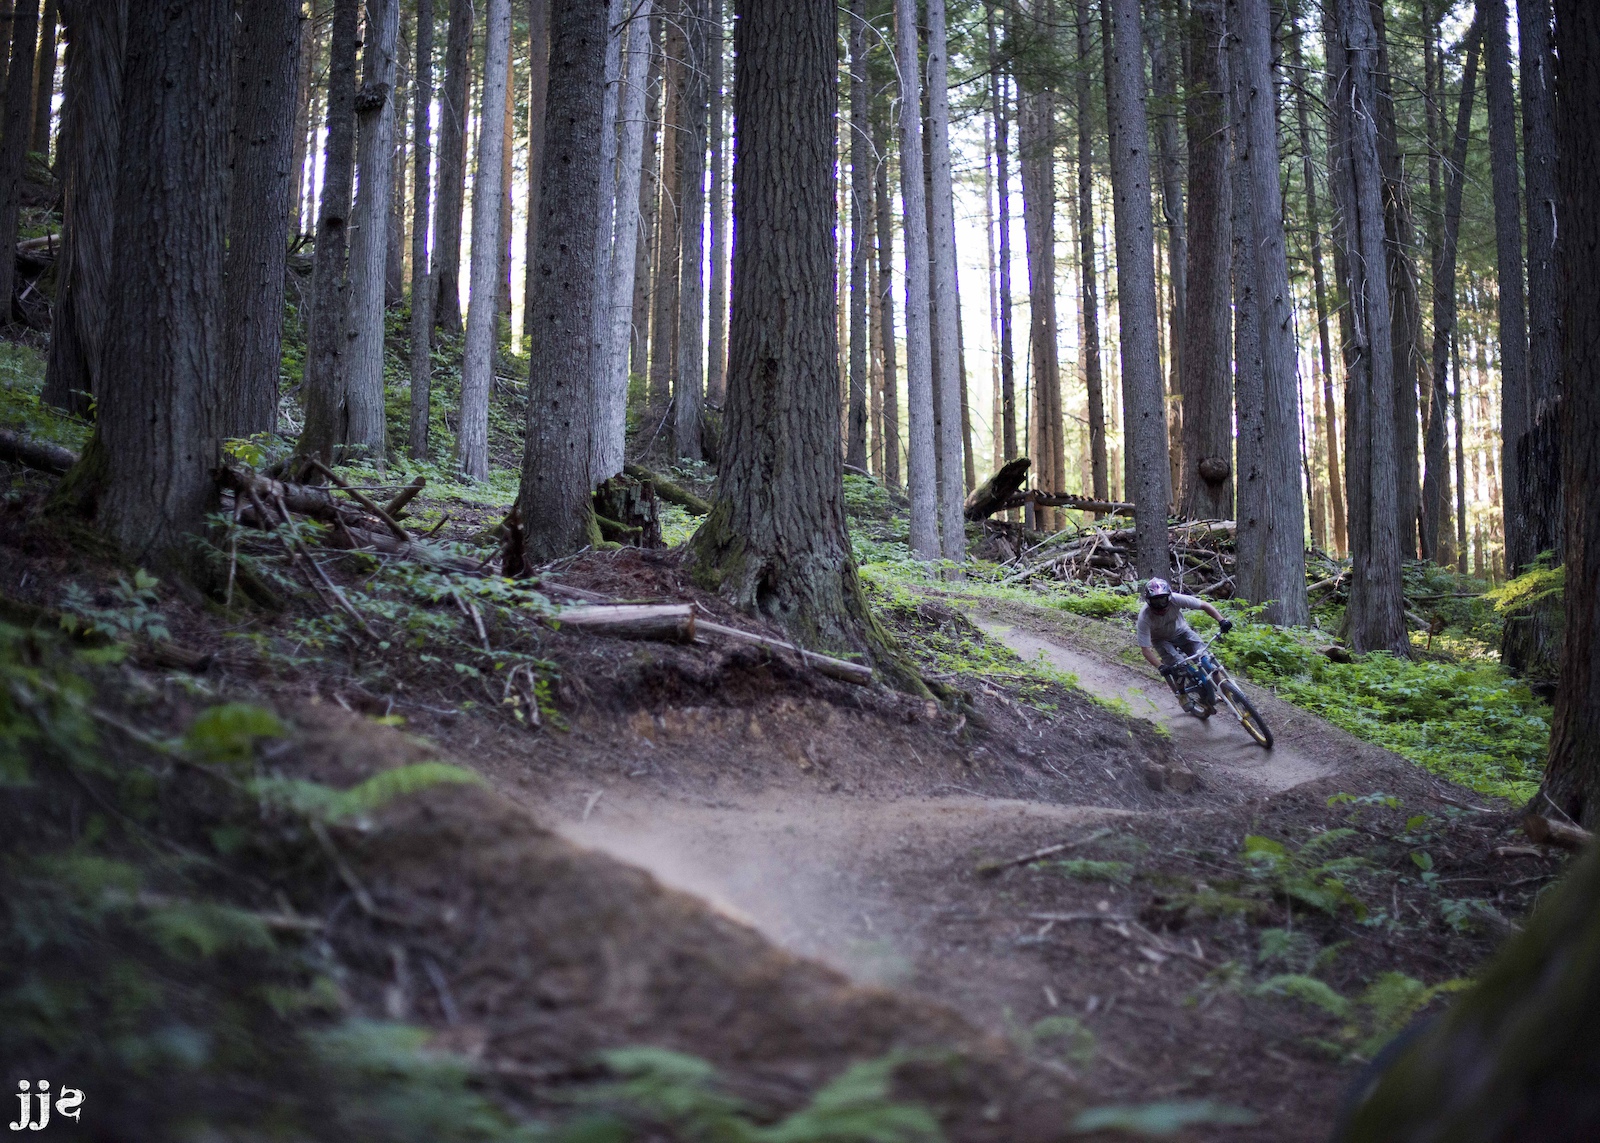 Riding some flowy berms at Boulder Mountain in Revelstoke, BC